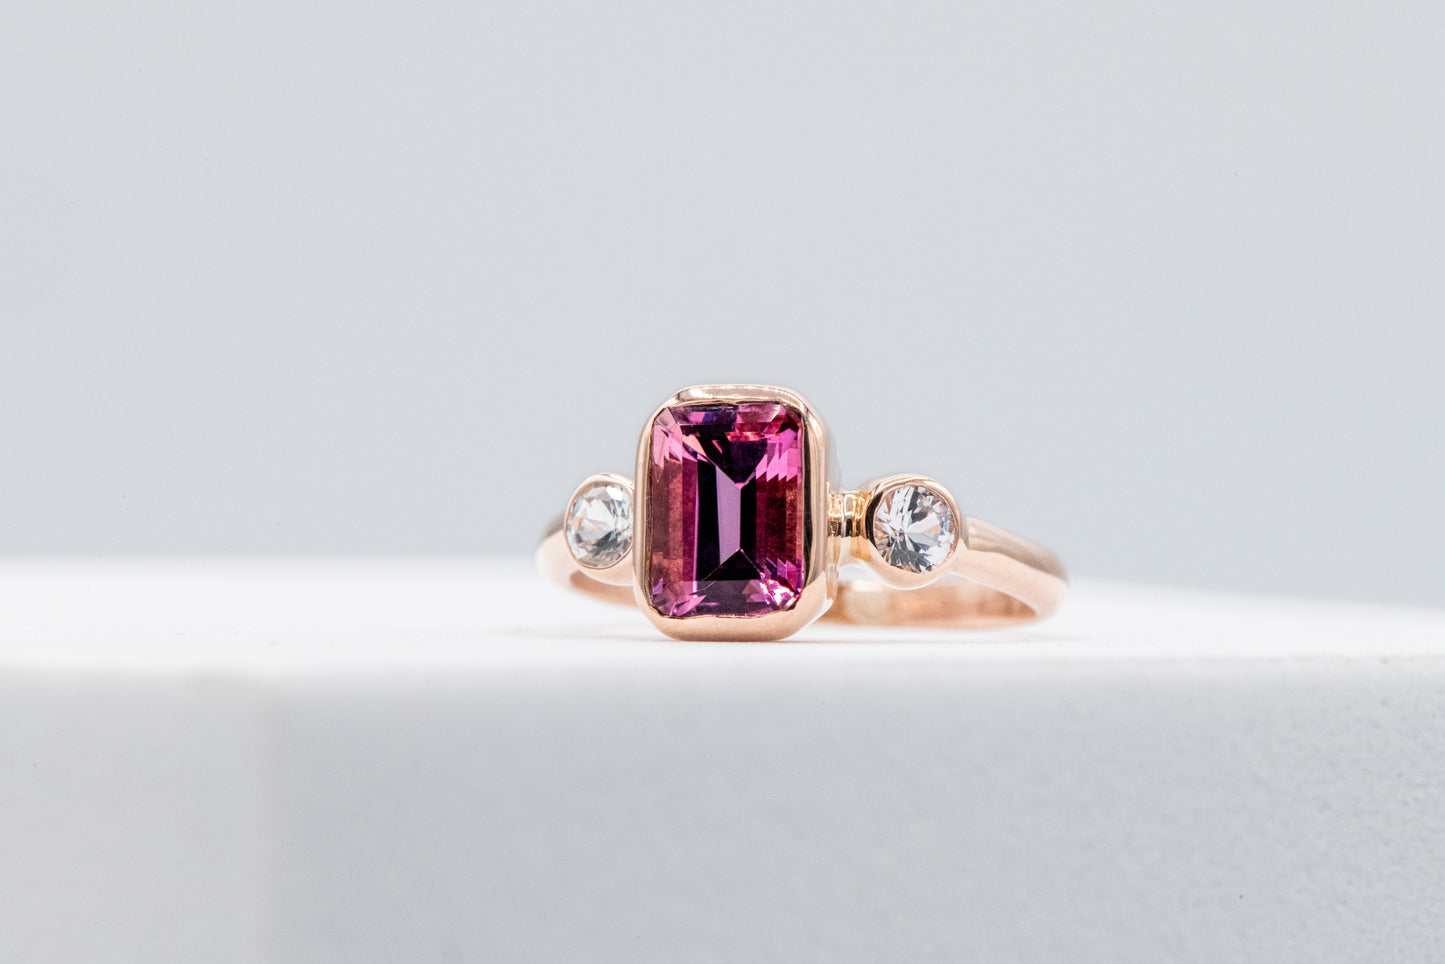 Product Name: Handmade Pink Tourmaline Ring | Cassin Jewelry